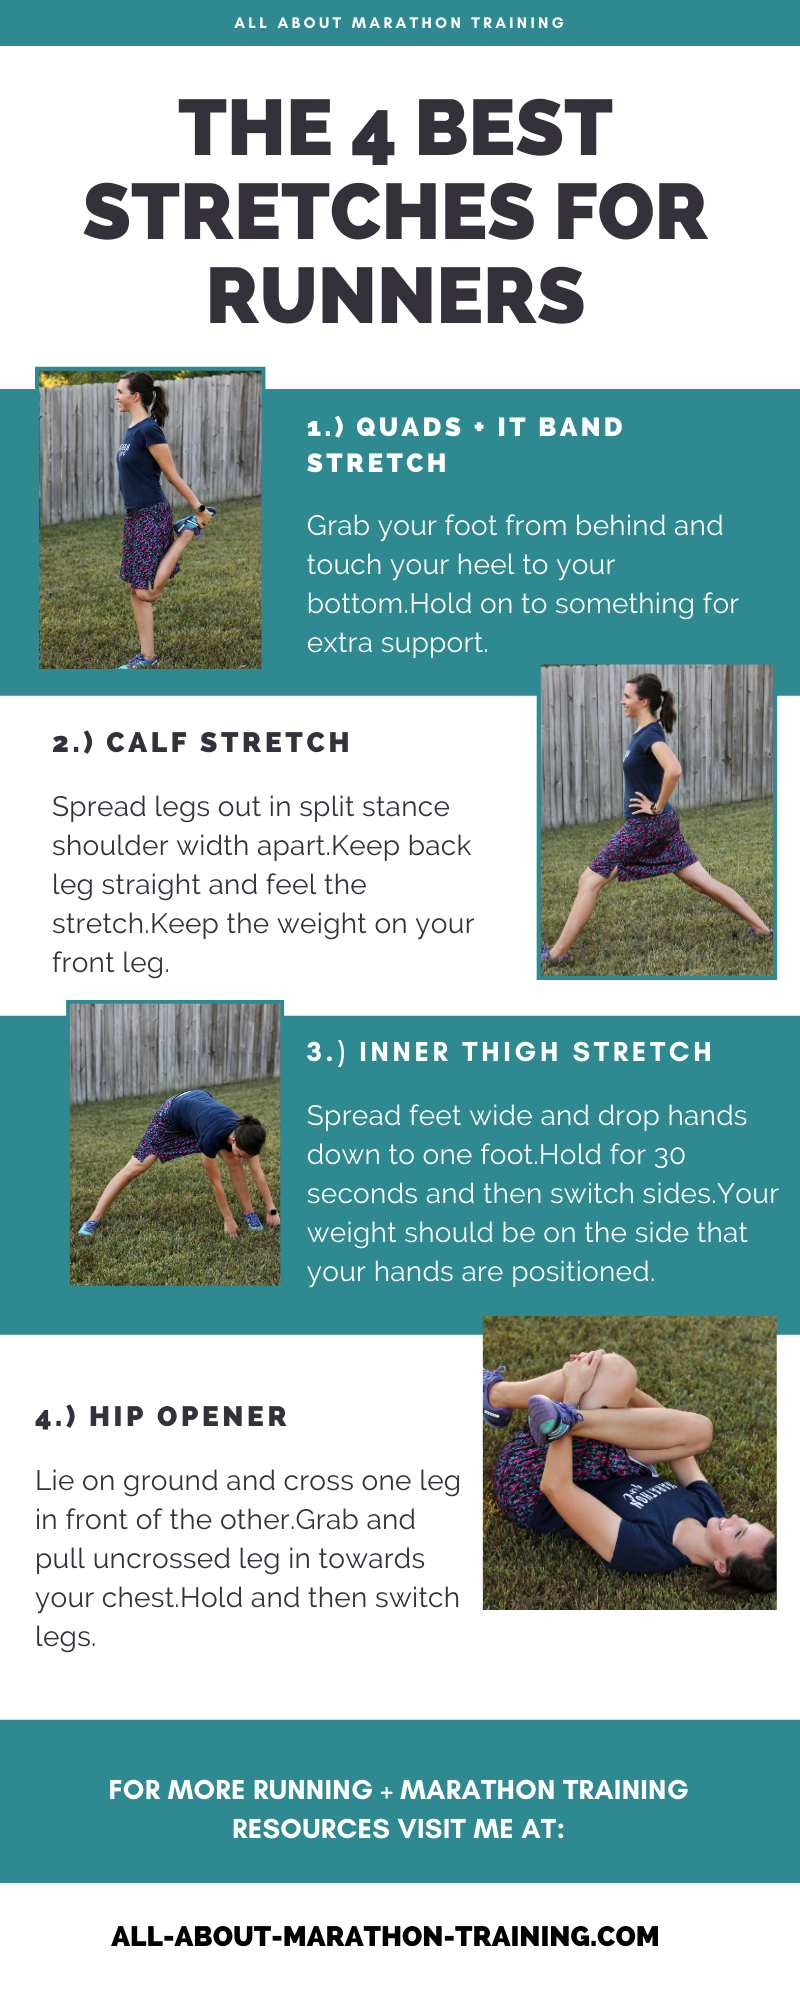 To stretch or not to stretch before exercise: What you need to